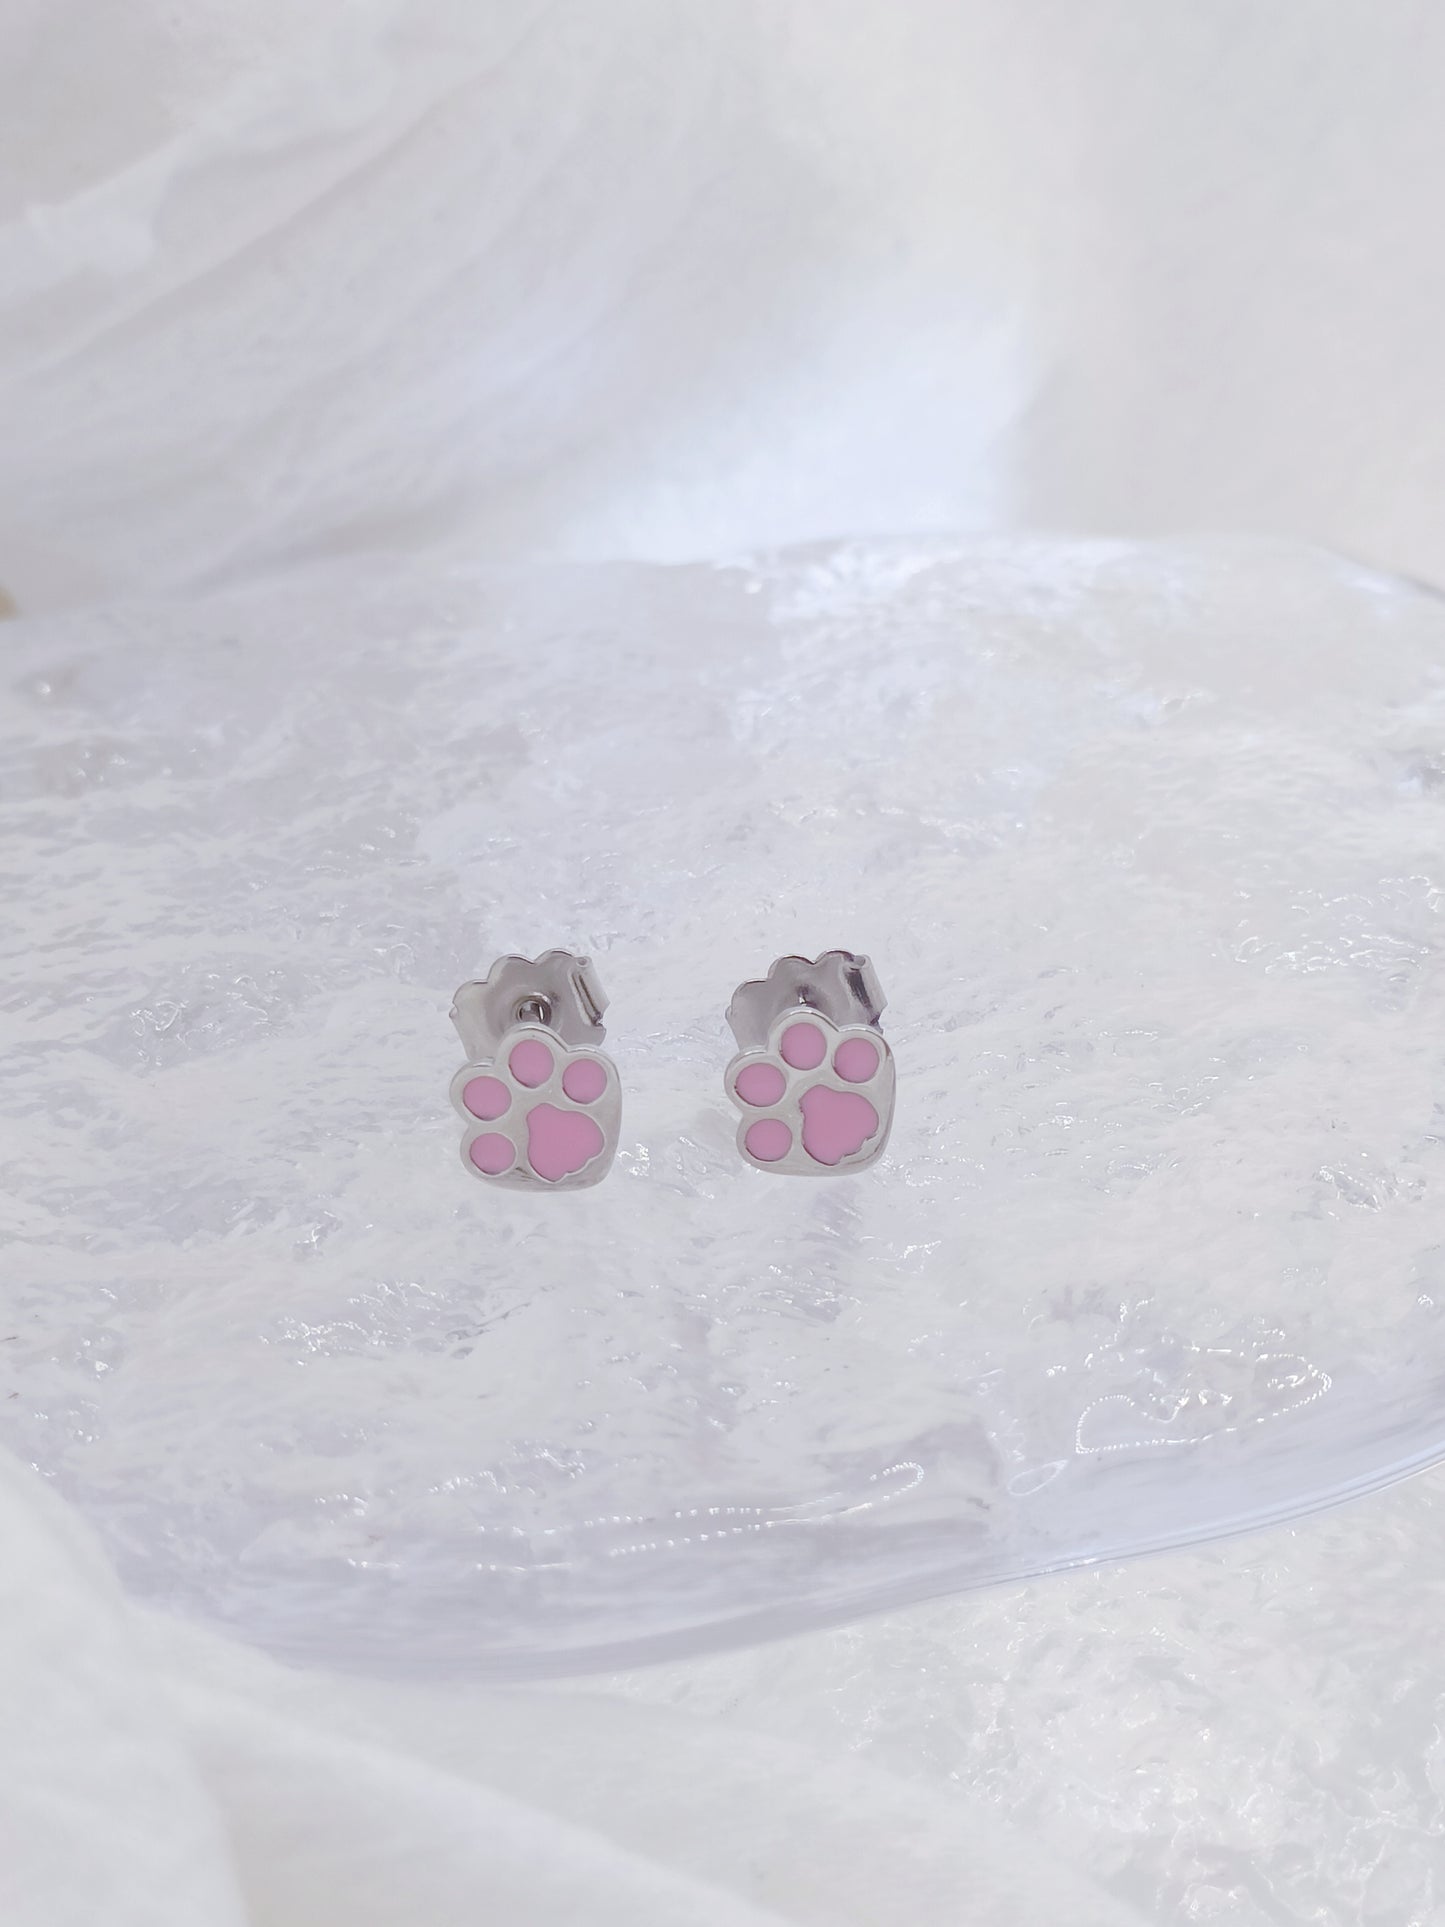 【Luxcellent x CreaMint】LAFS (Love at First Sight) Earrings